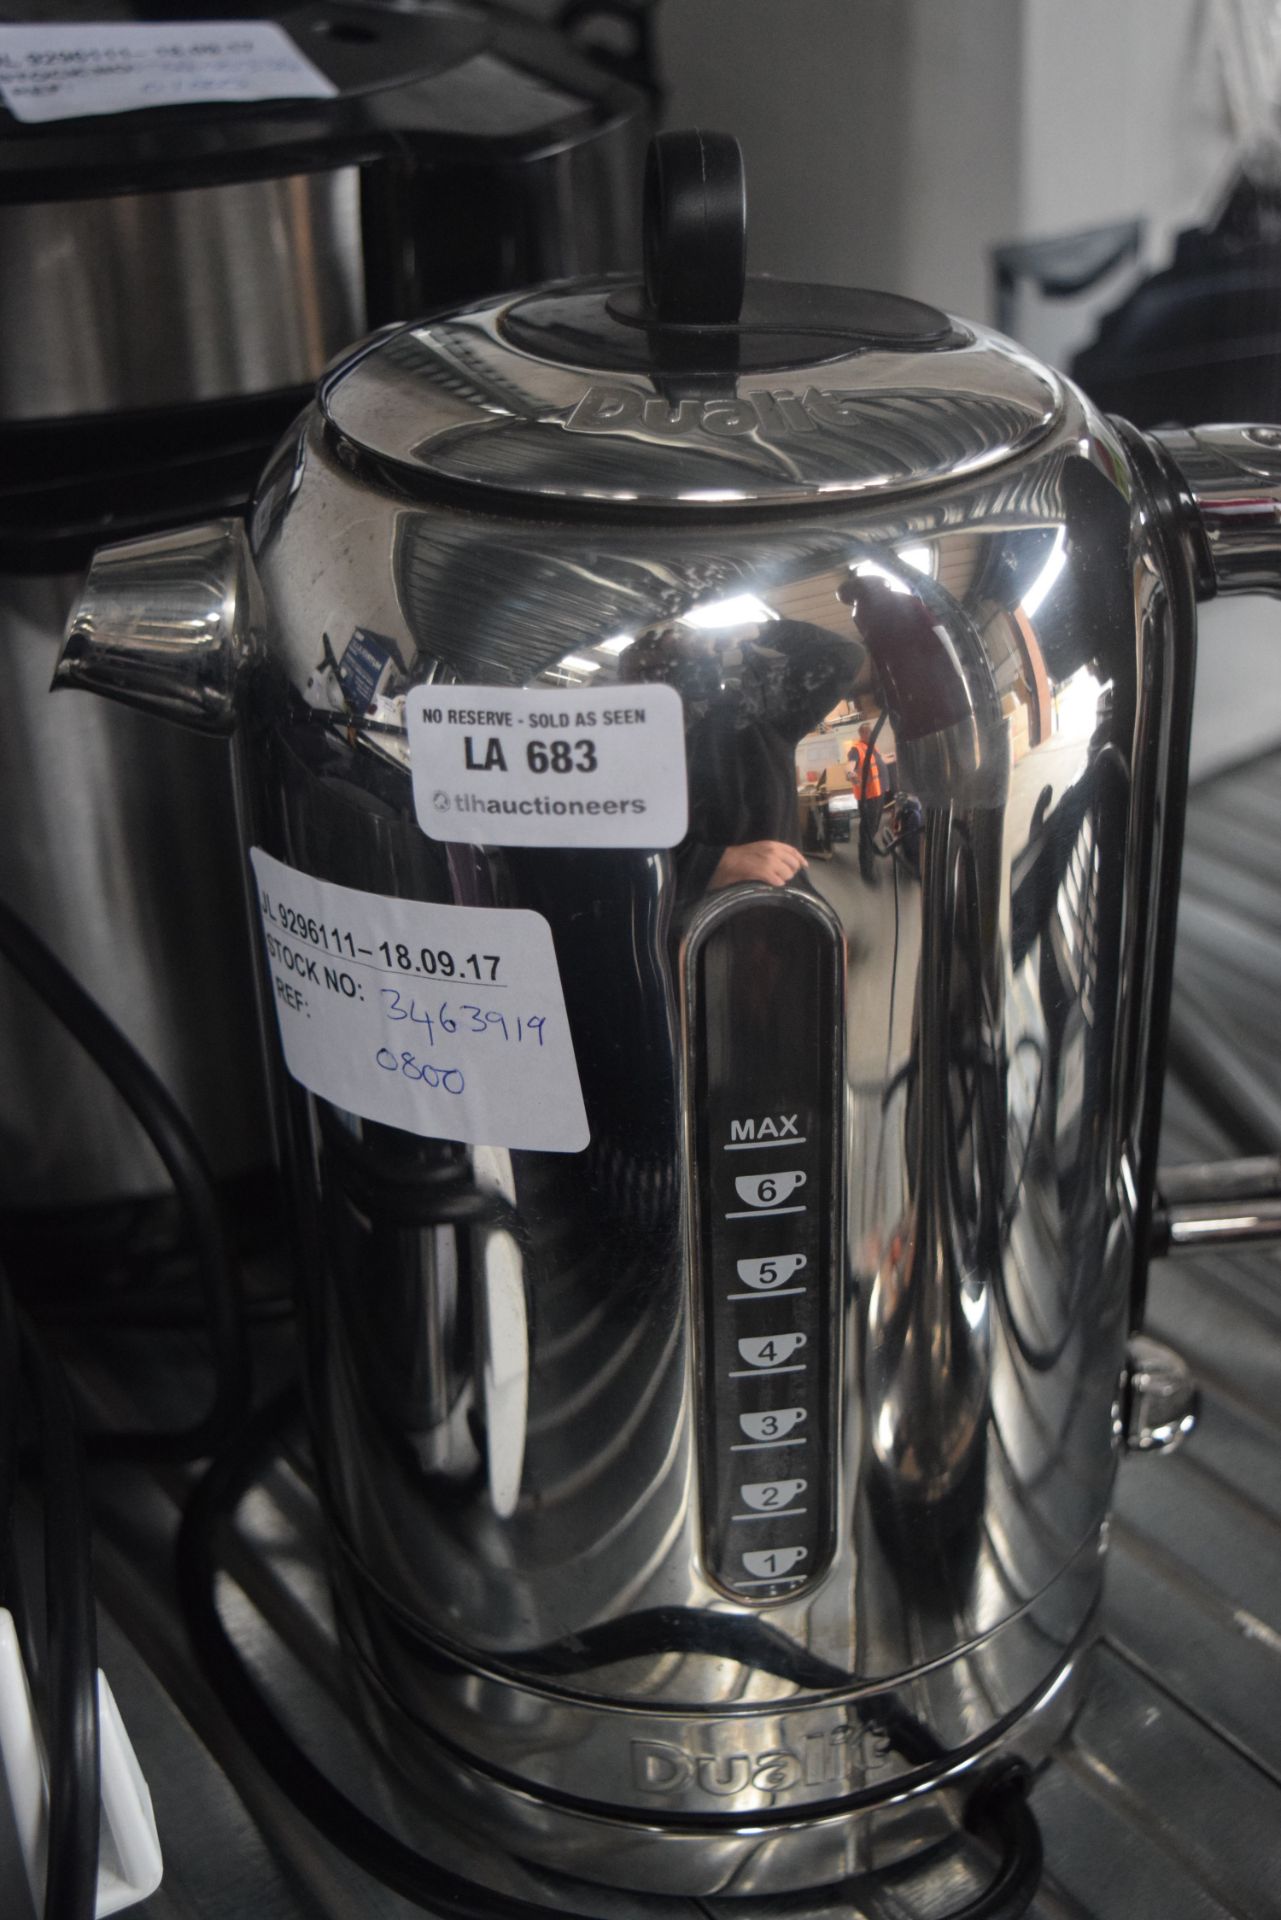 1 x DUALIT CLASSIC KETTLE RRP £80 18.09.17 (3463919) *PLEASE NOTE THAT THE BID PRICE IS MULTIPLIED